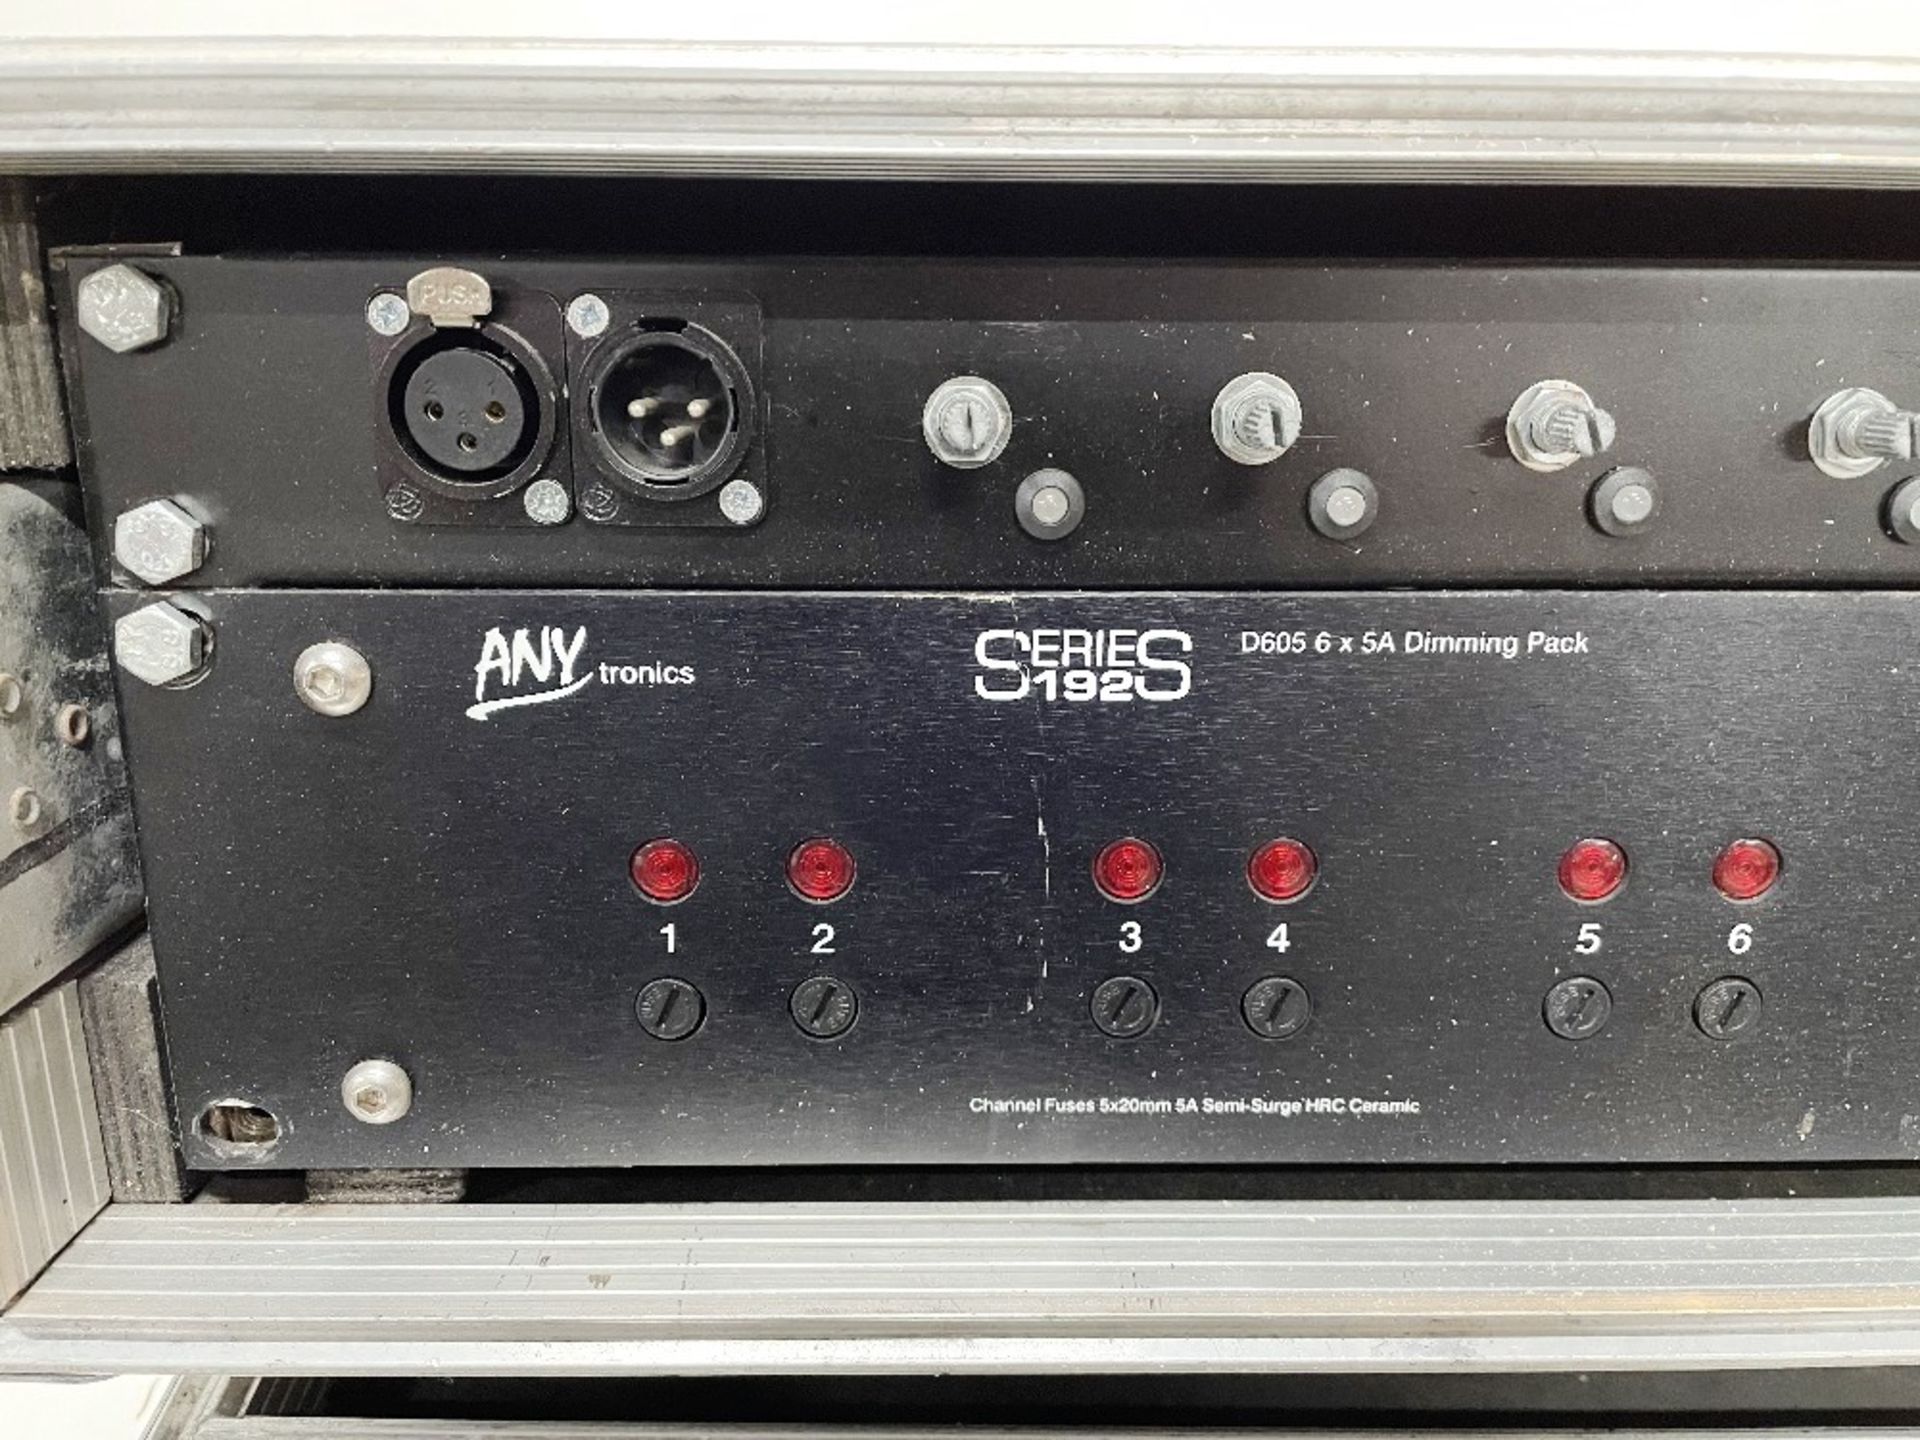 Anytronics Series 192 D605 6 x 5A Dimming Pack w/ Flight Case - Image 3 of 4